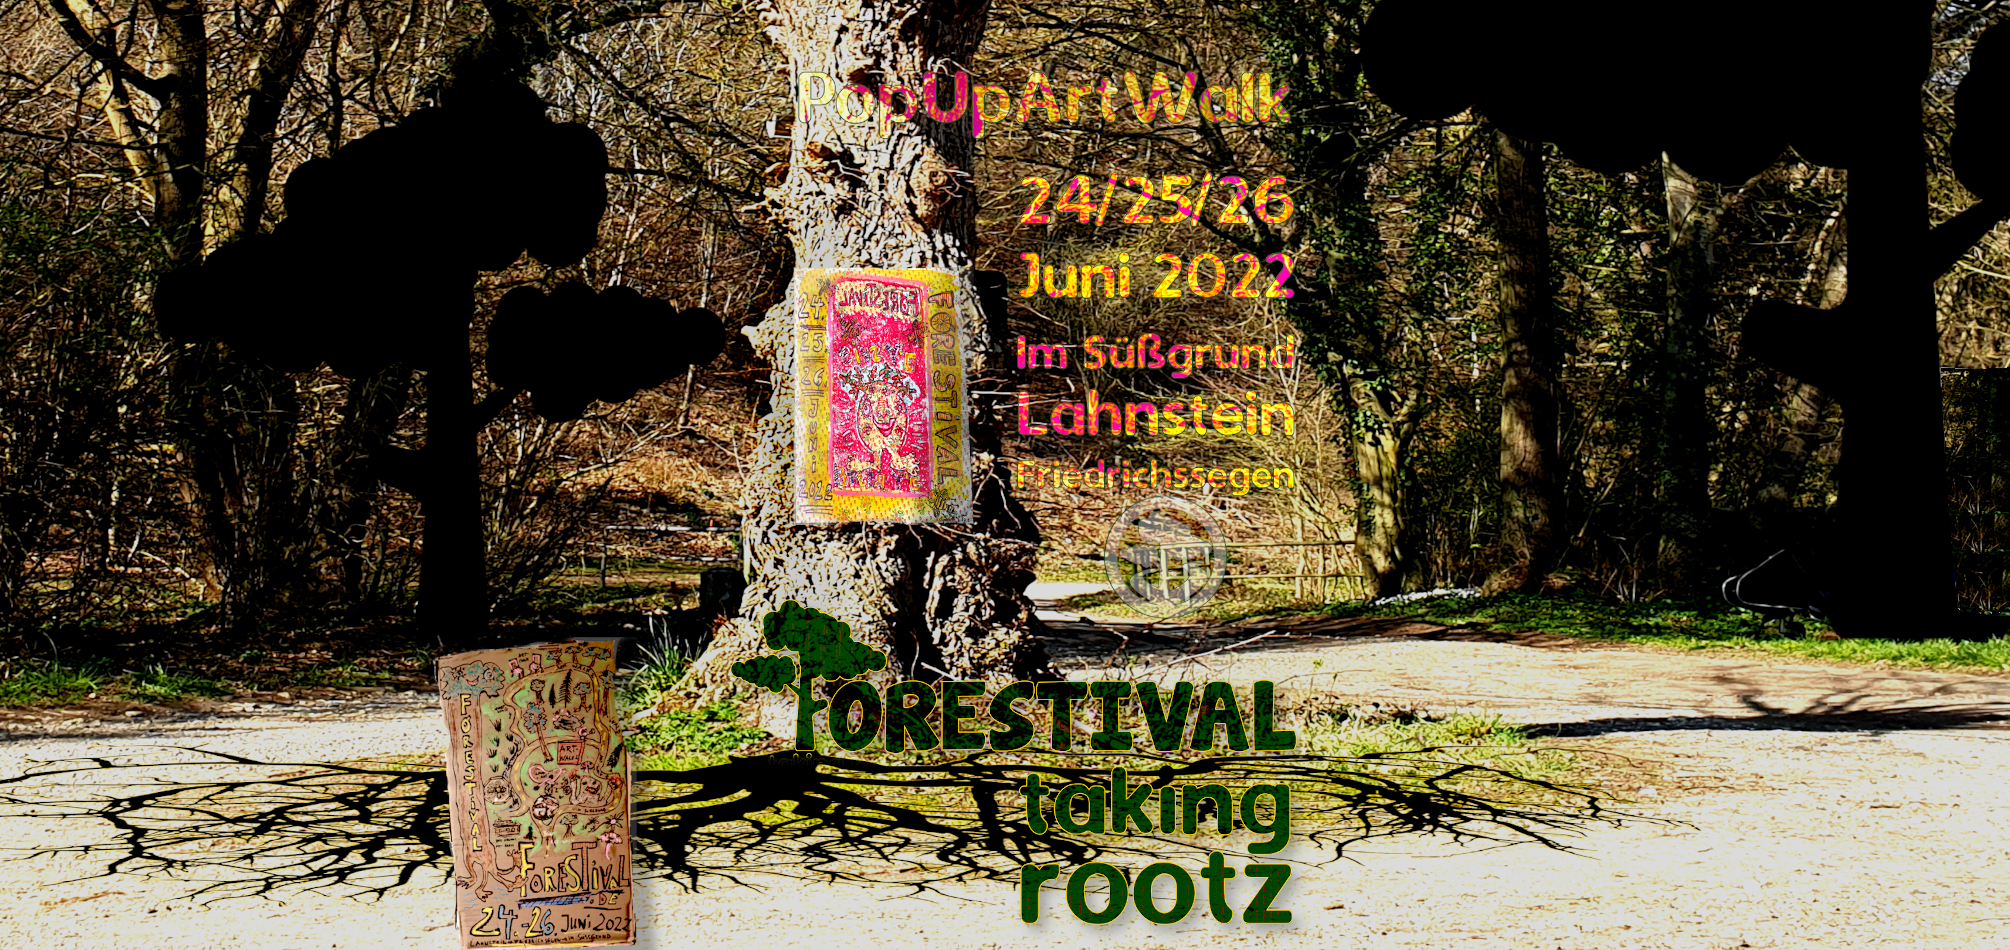 Forestival/Taking Roots/2022